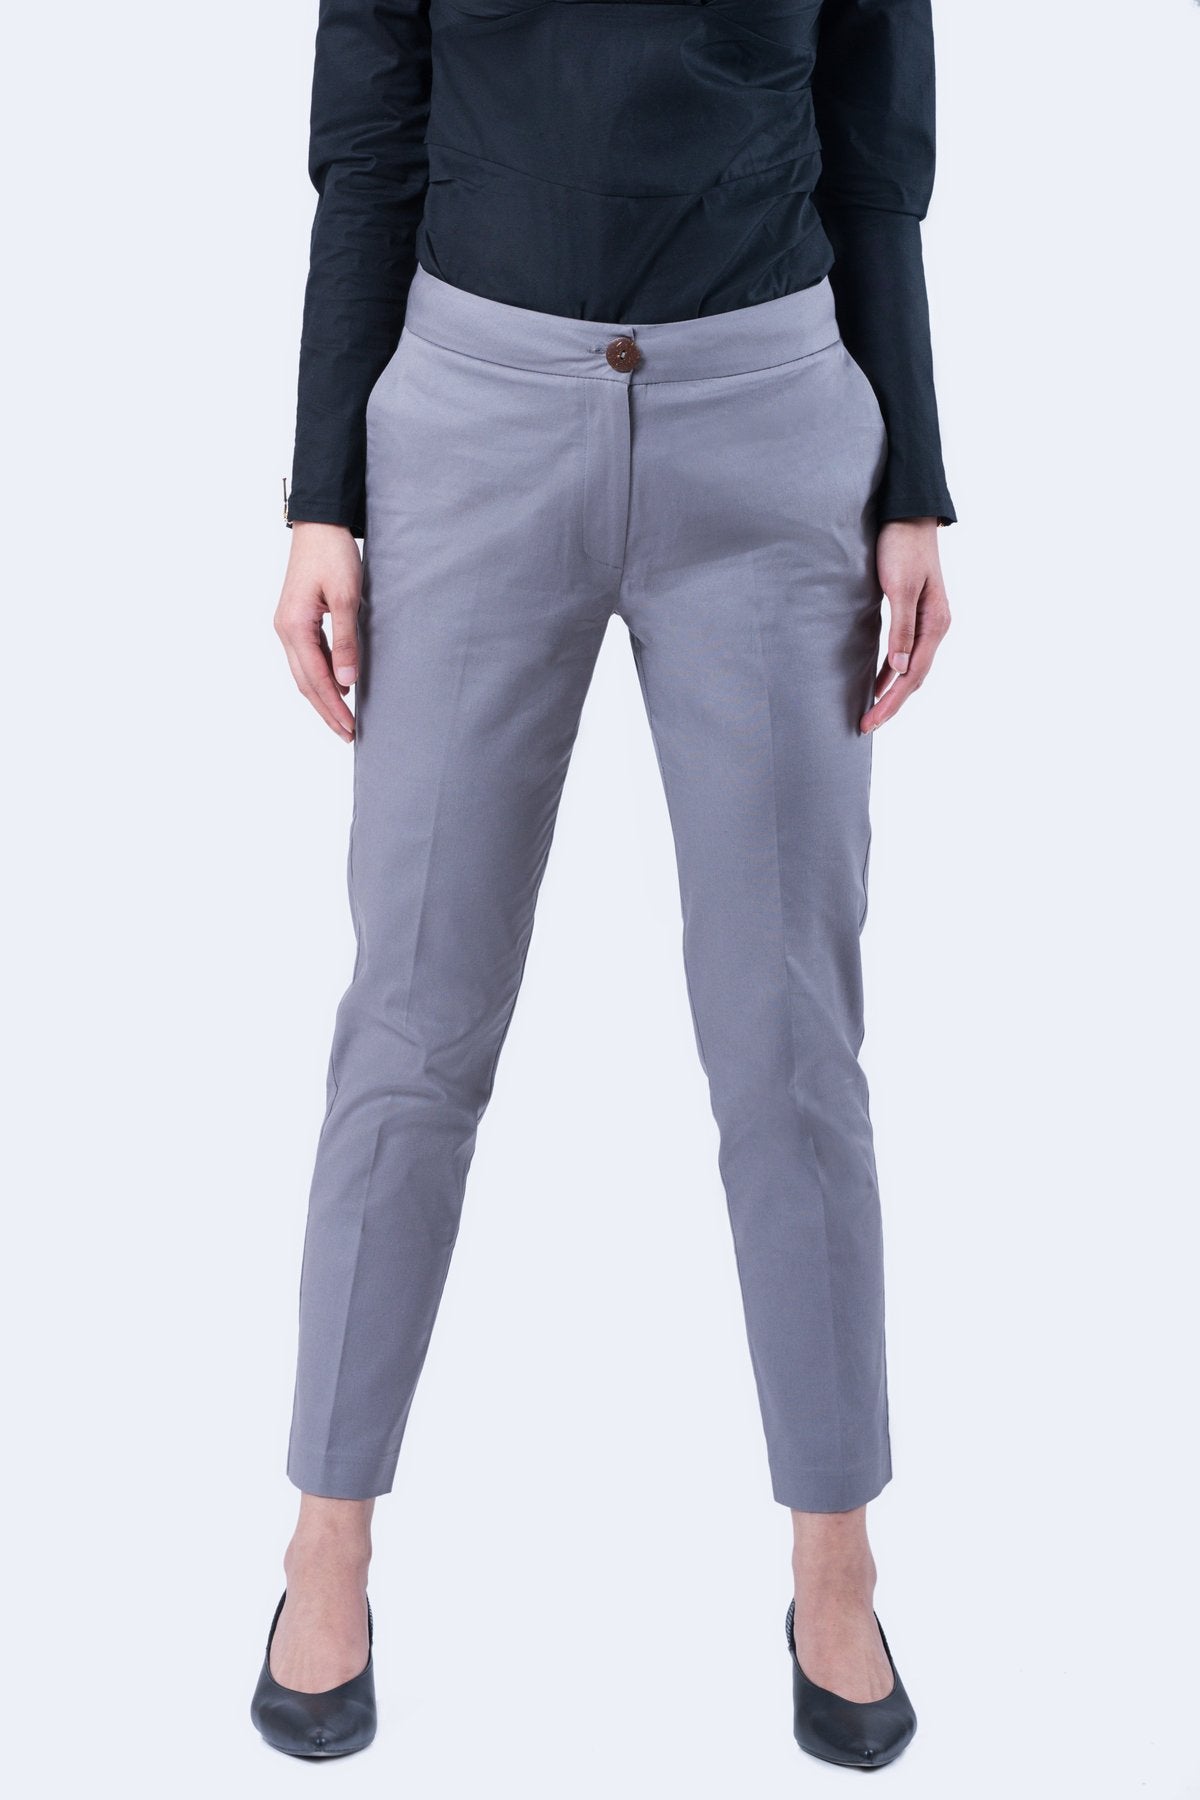 MAUVAIS Grey Check Cropped Smart Trousers in 2023  Cropped trousers  Trousers Pinstripe